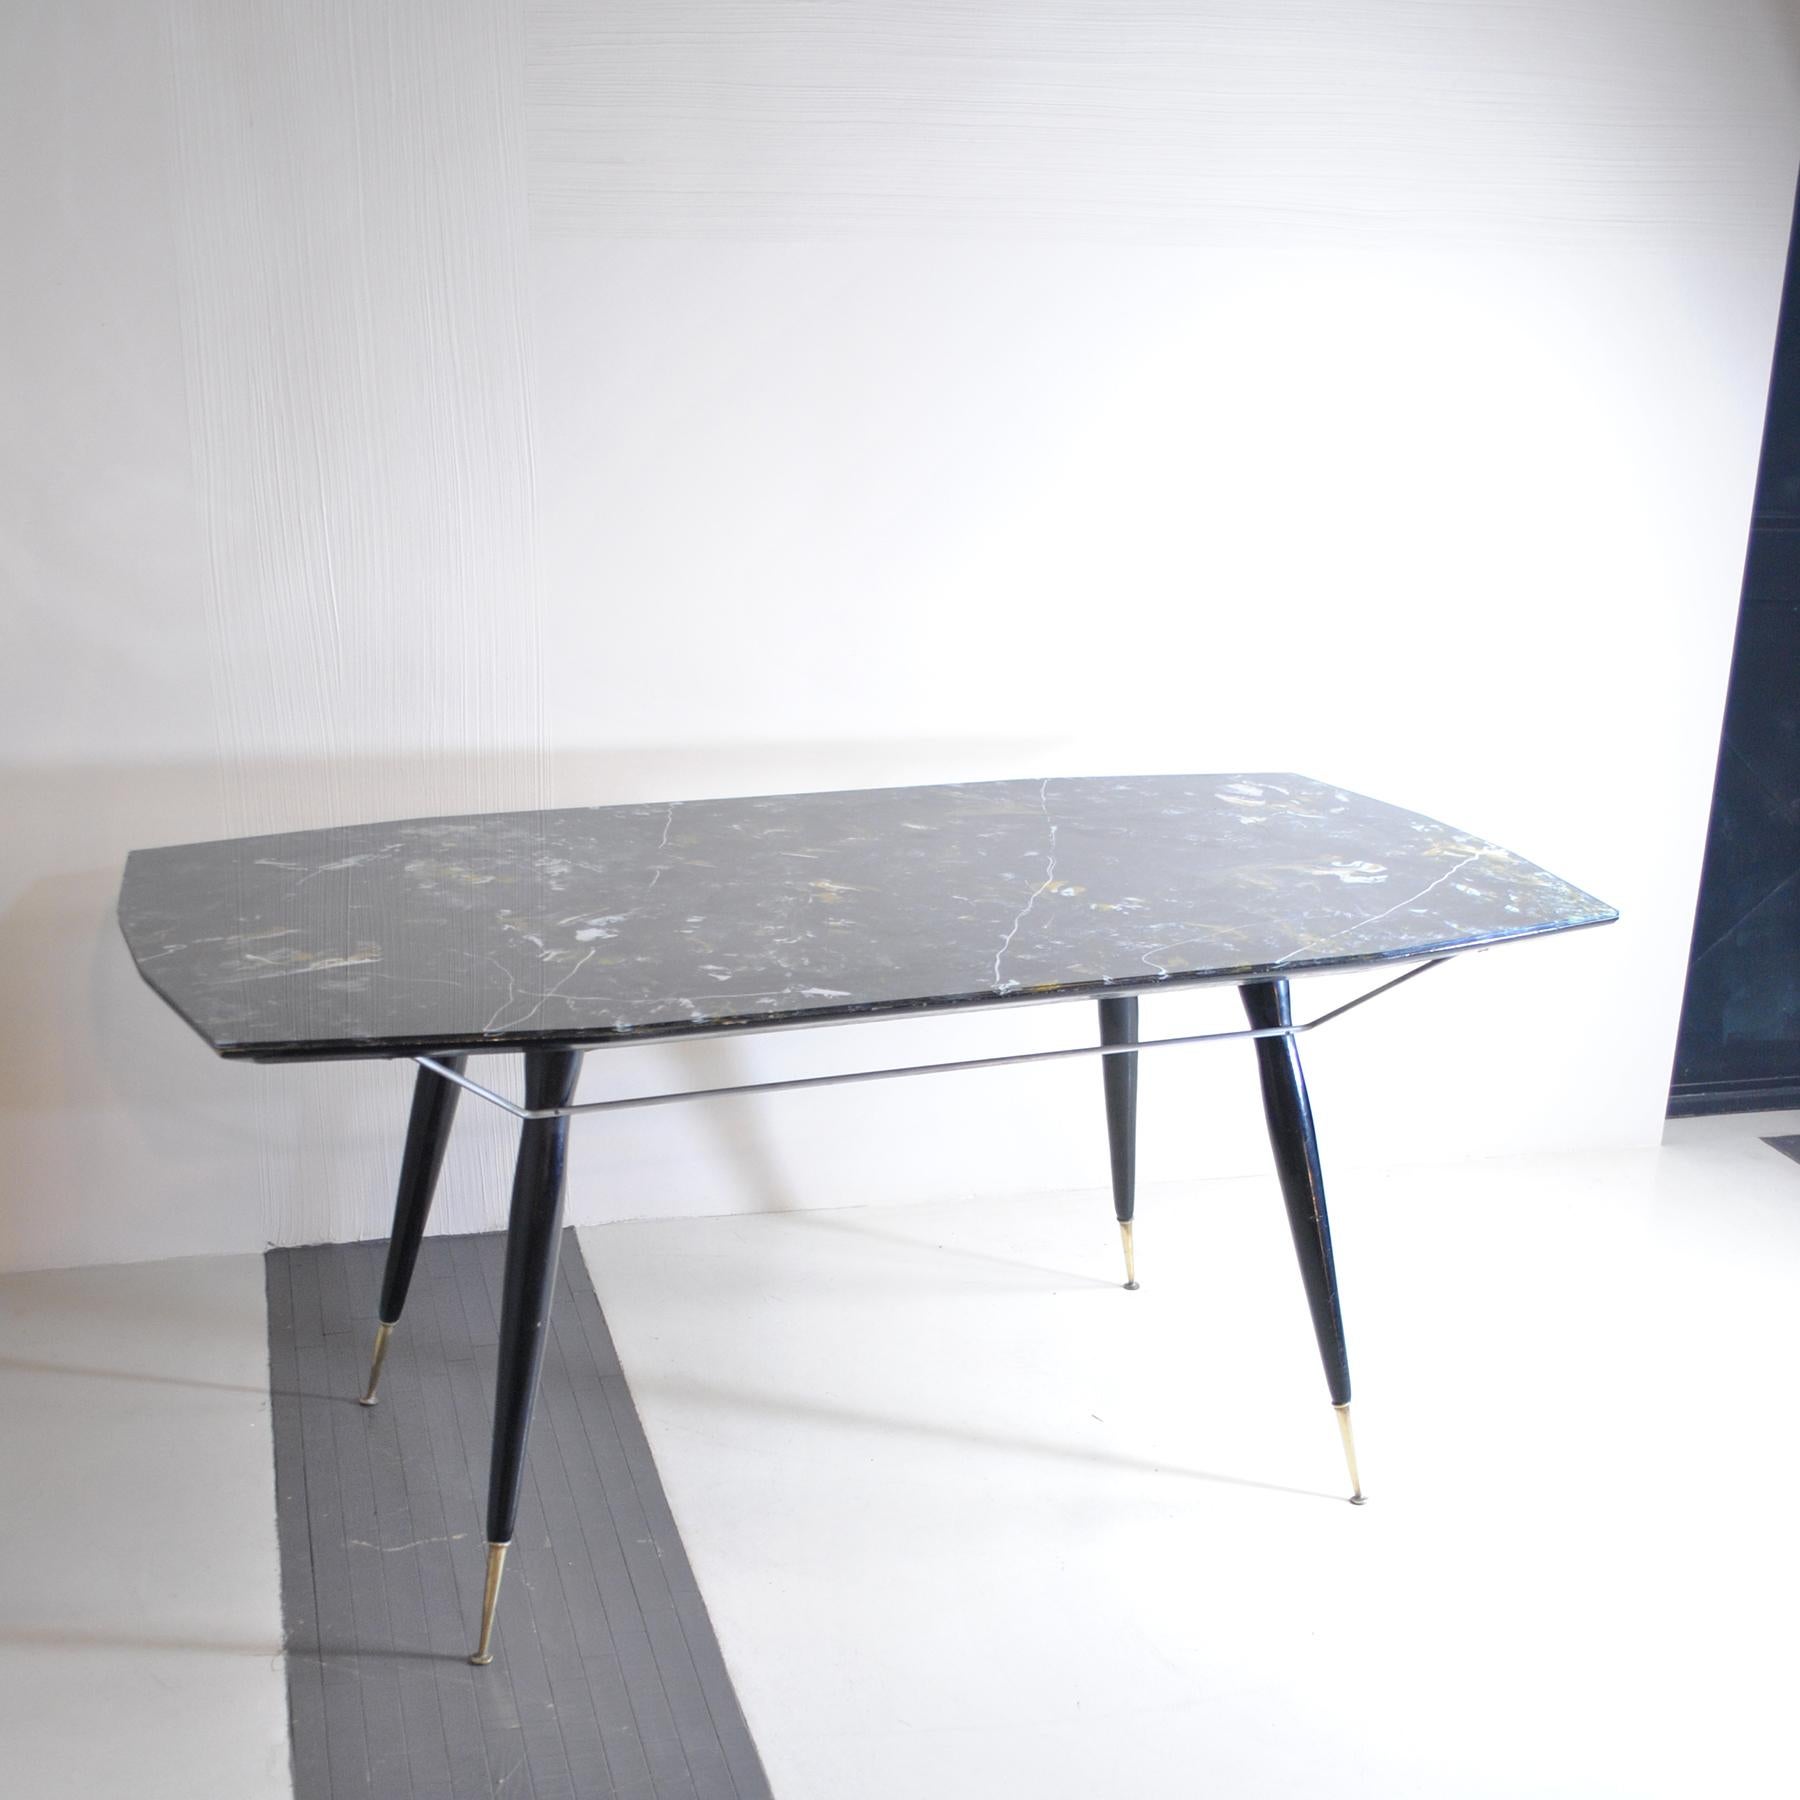 Italian Midcentury Table from the 1960s For Sale 2